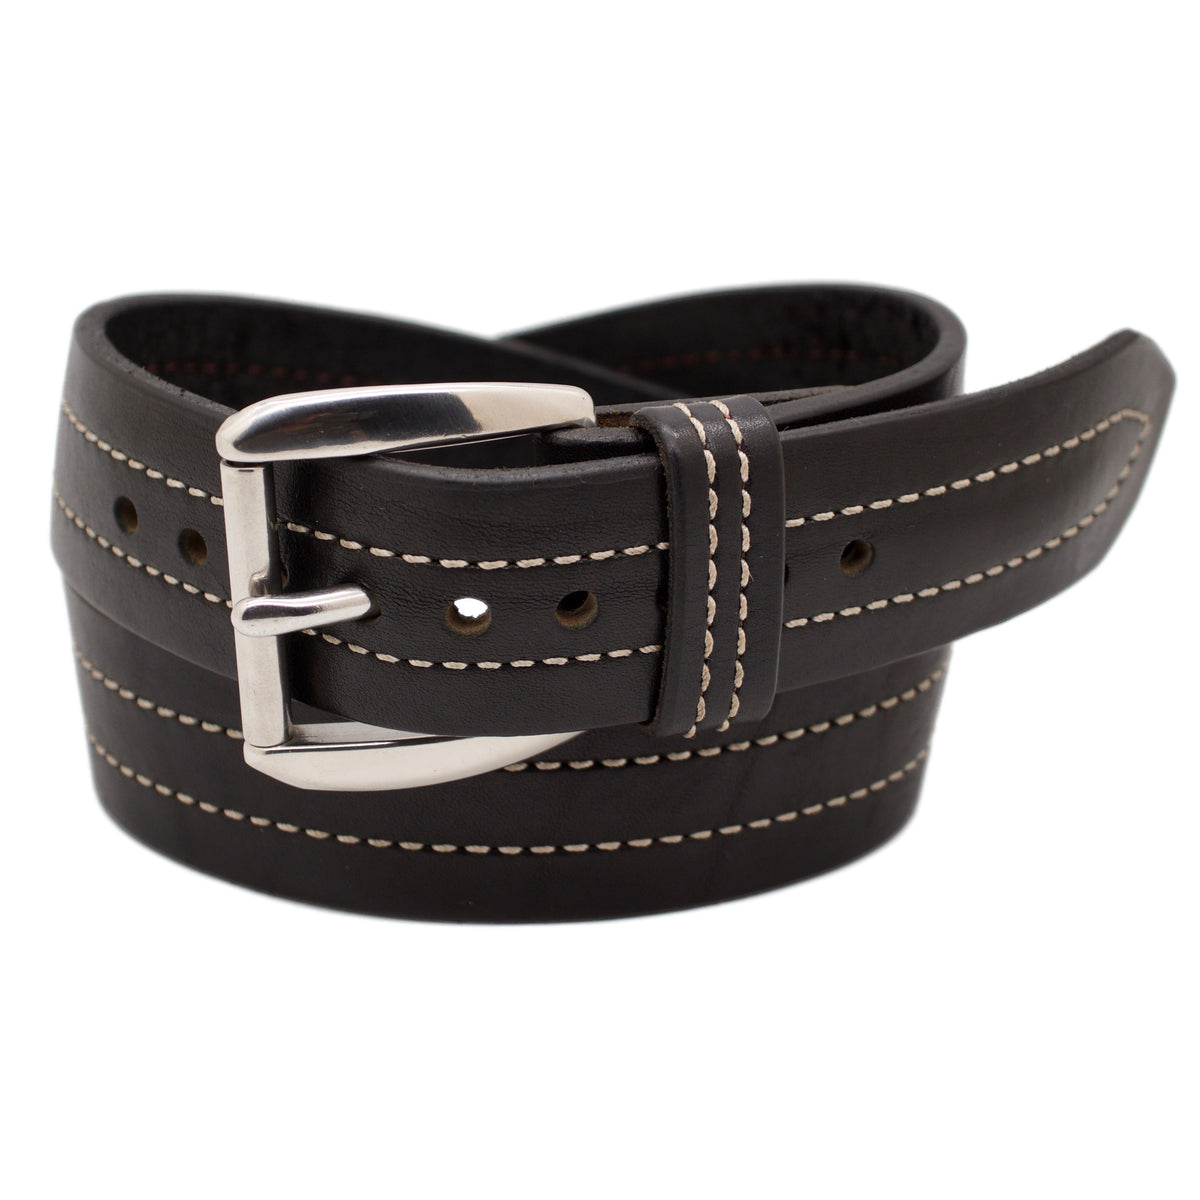 The YELLOWSTONE Wide 1.75 Leather Belt